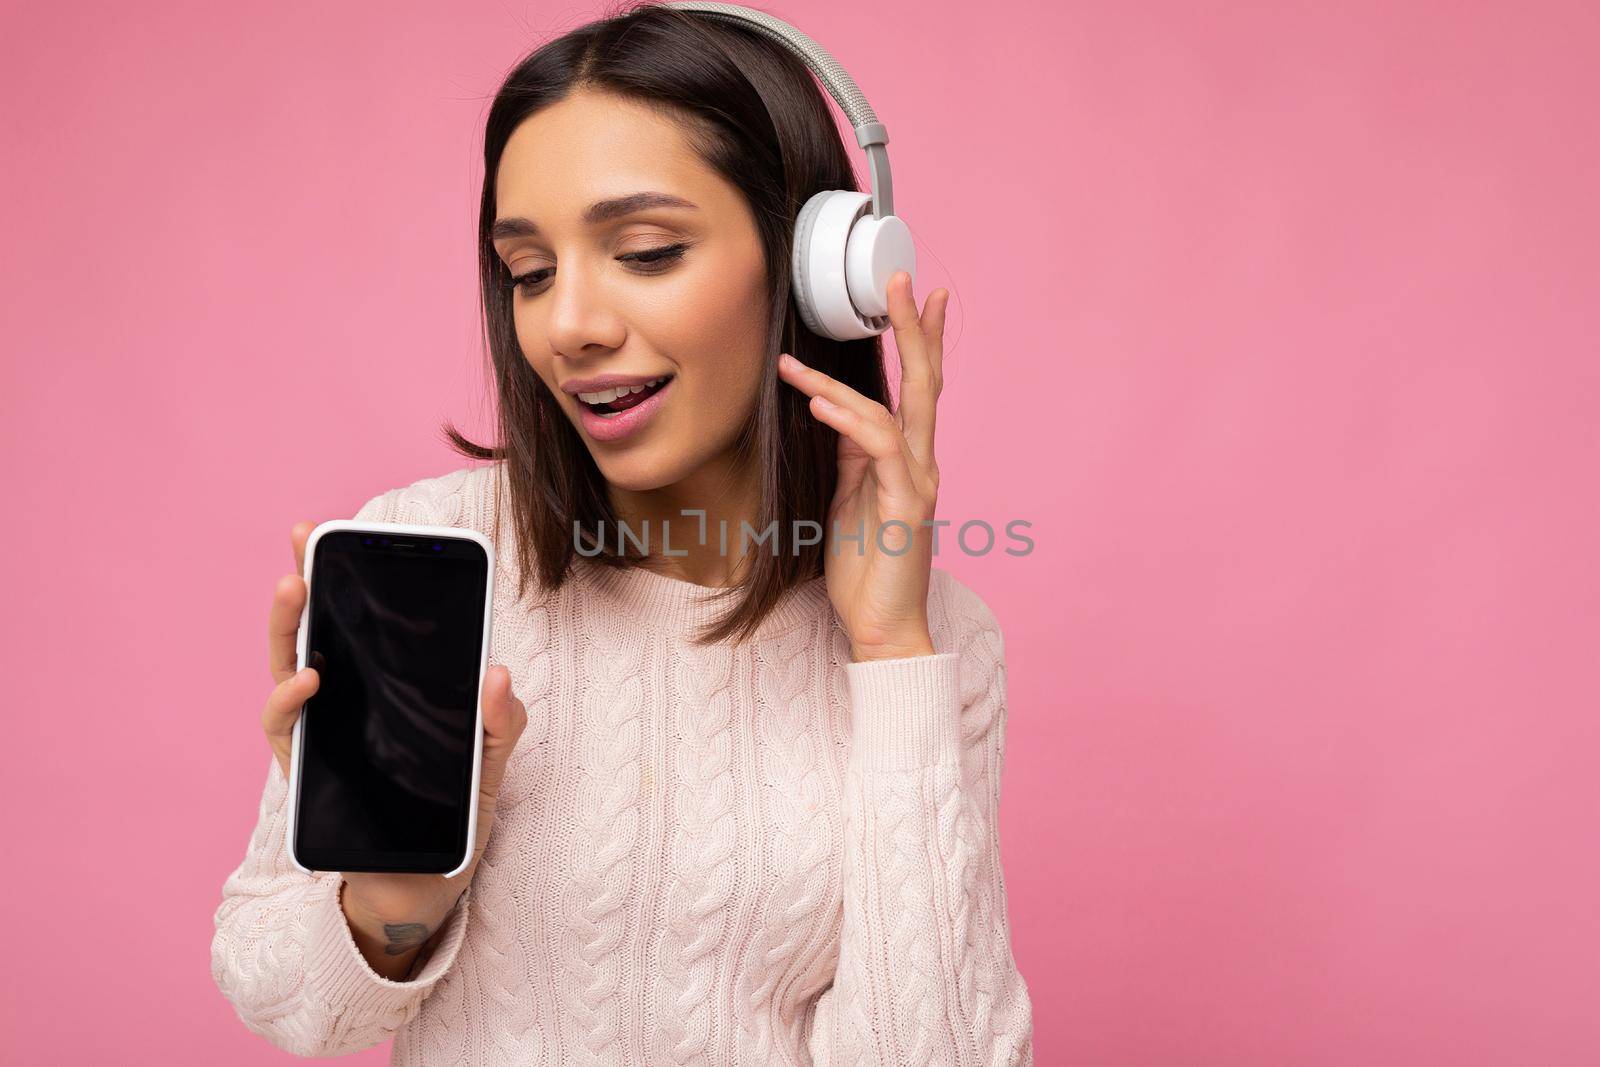 Closeup portrait of attractive positive cute young woman wearing stylish casual outfit isolated on colourful background wall holding and showing mobile phone with empty screen for cutout wearing white bluetooth headphones and having fun looking down.